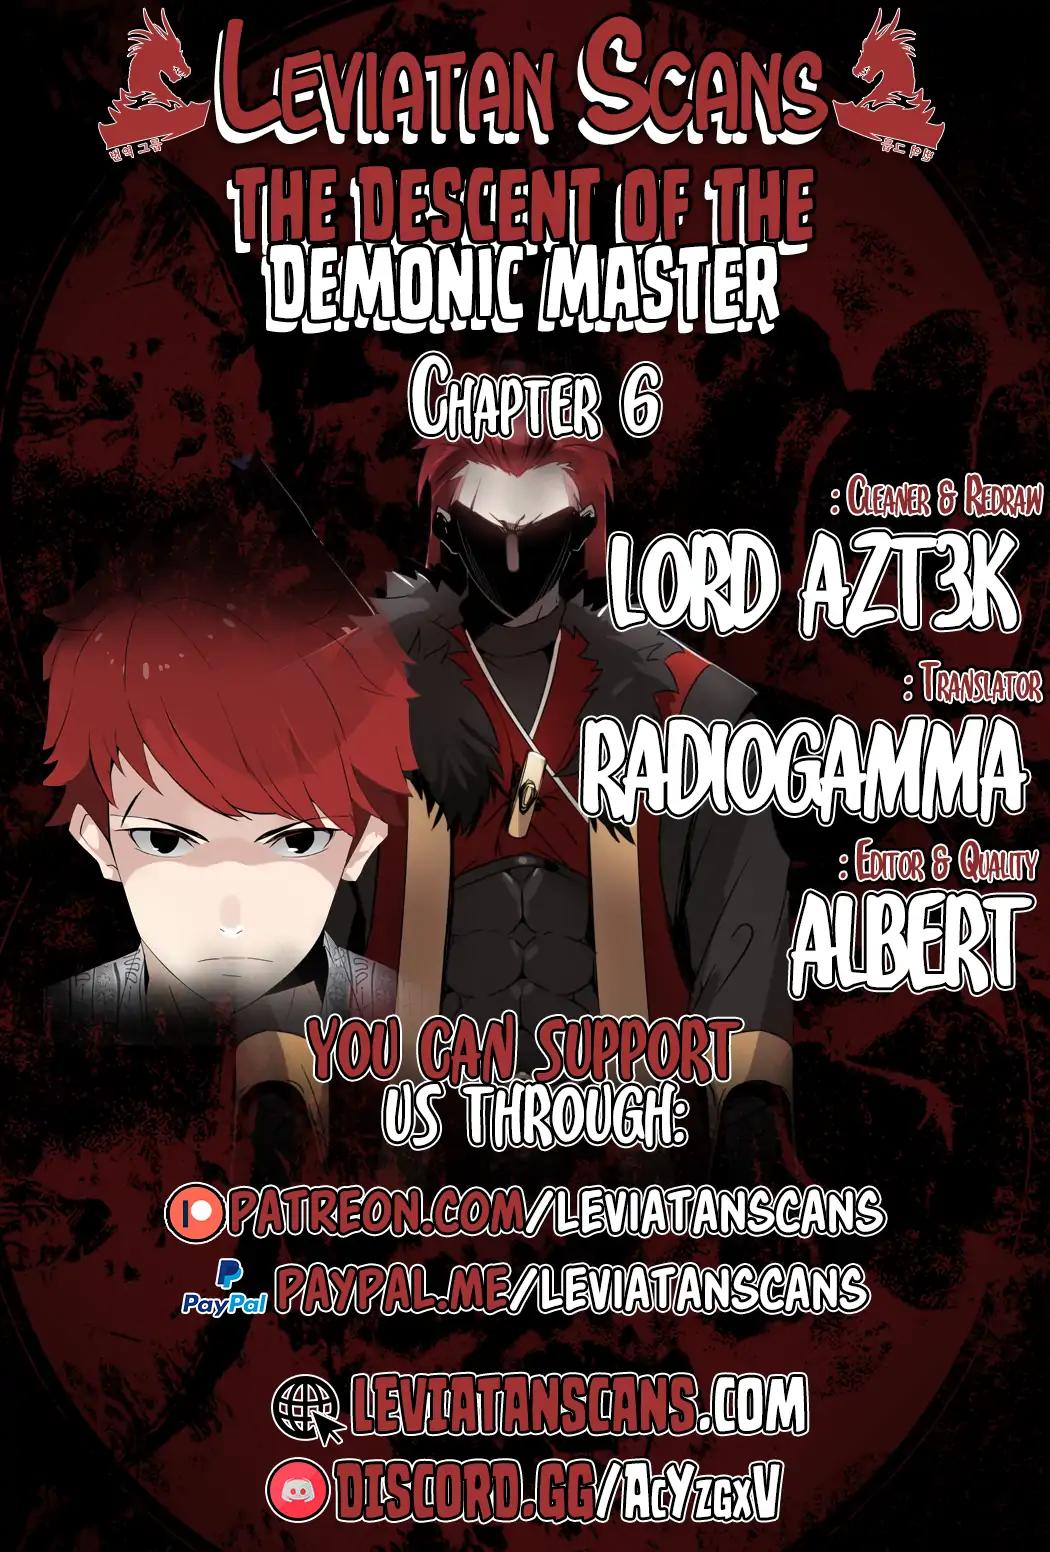 The Descent of the Demonic Master Chapter 6